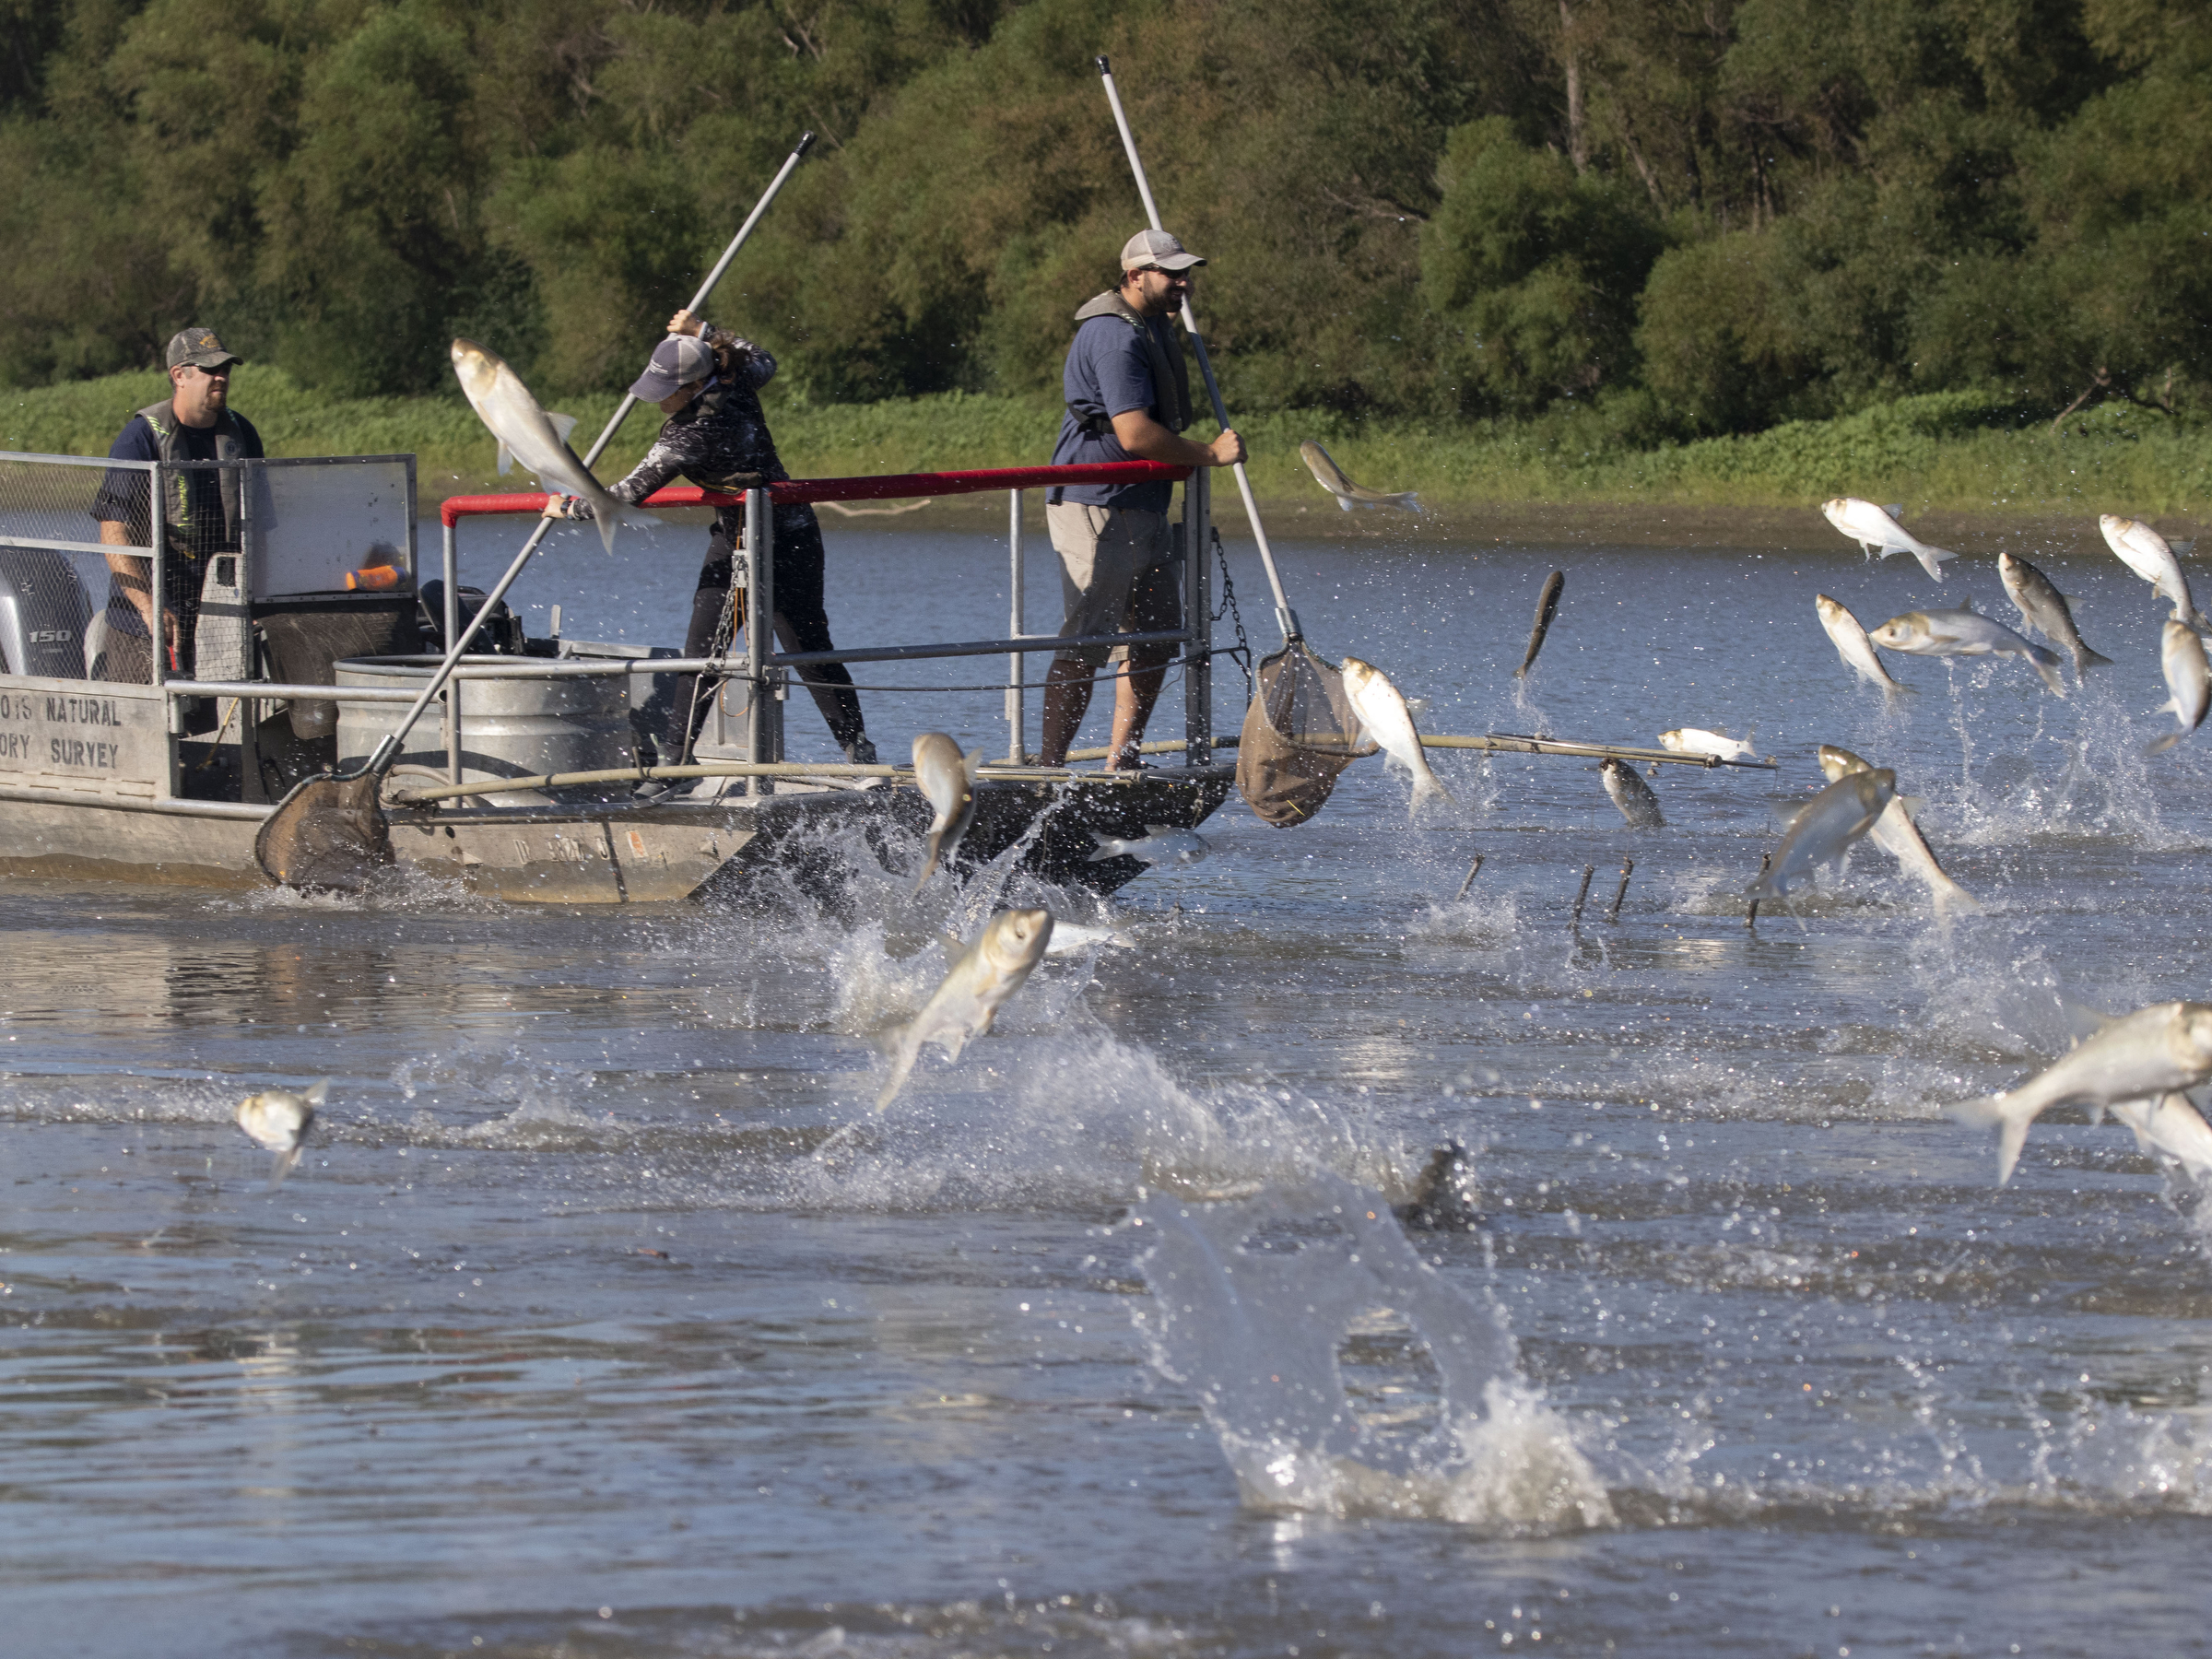 With record catch of invasive carp, wildlife officials keep